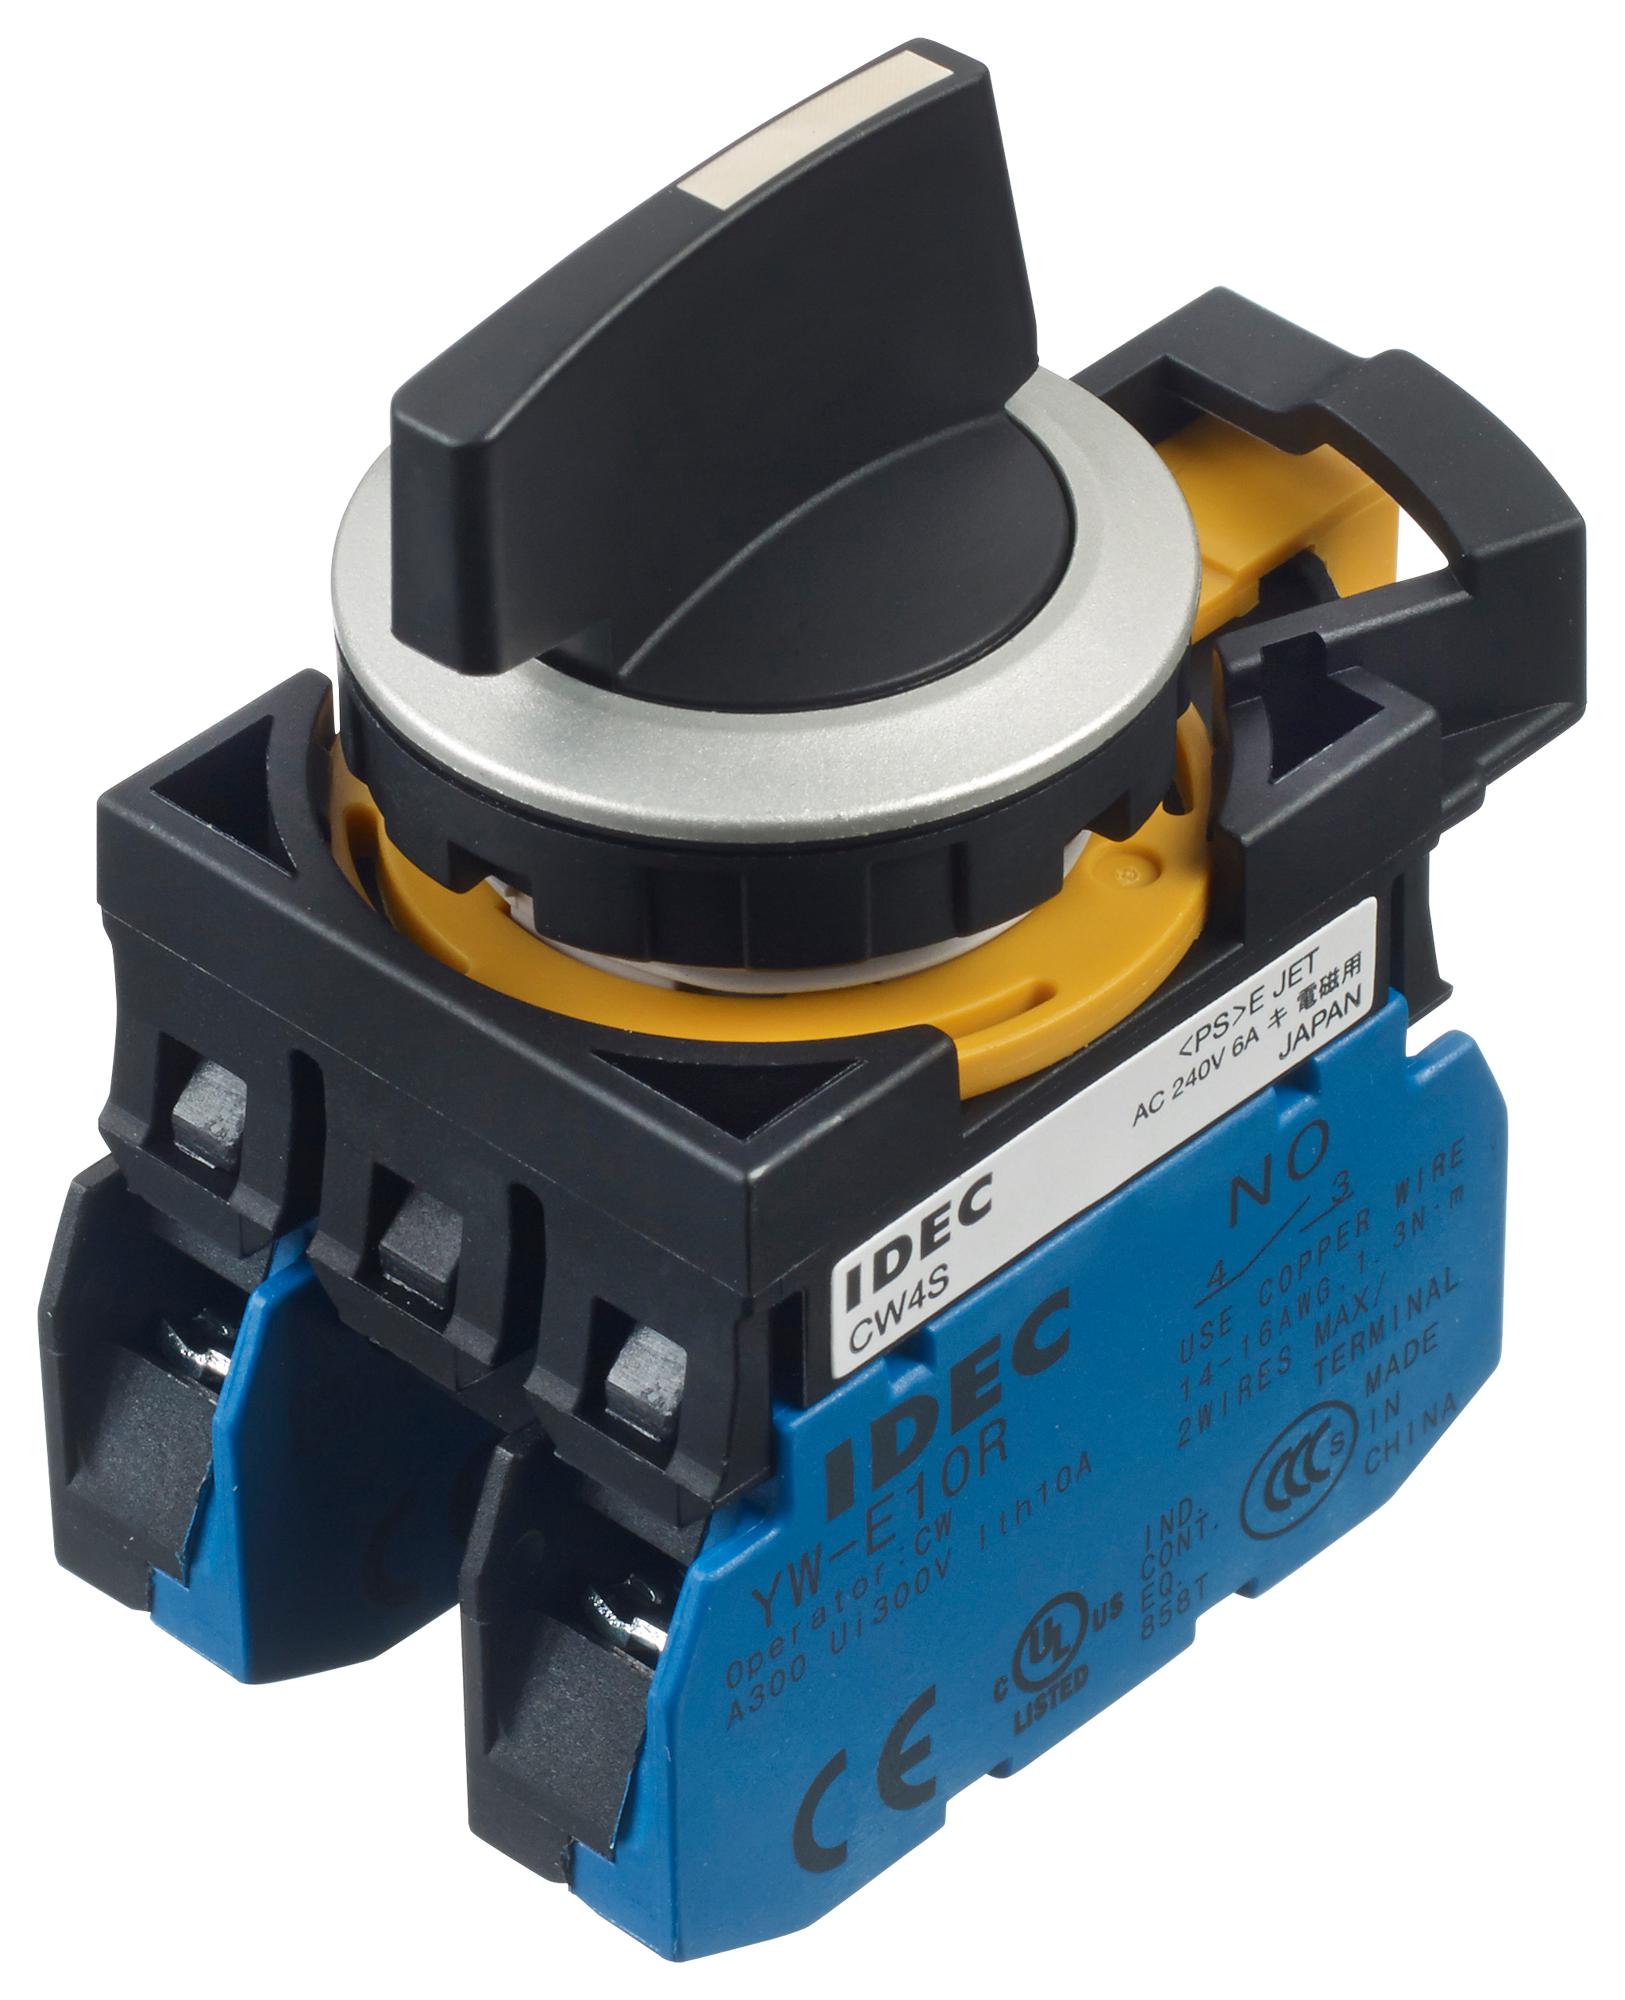 CW4S-3LE20 ROTARY SWITCH, 3 POS, 10A, 240VAC IDEC